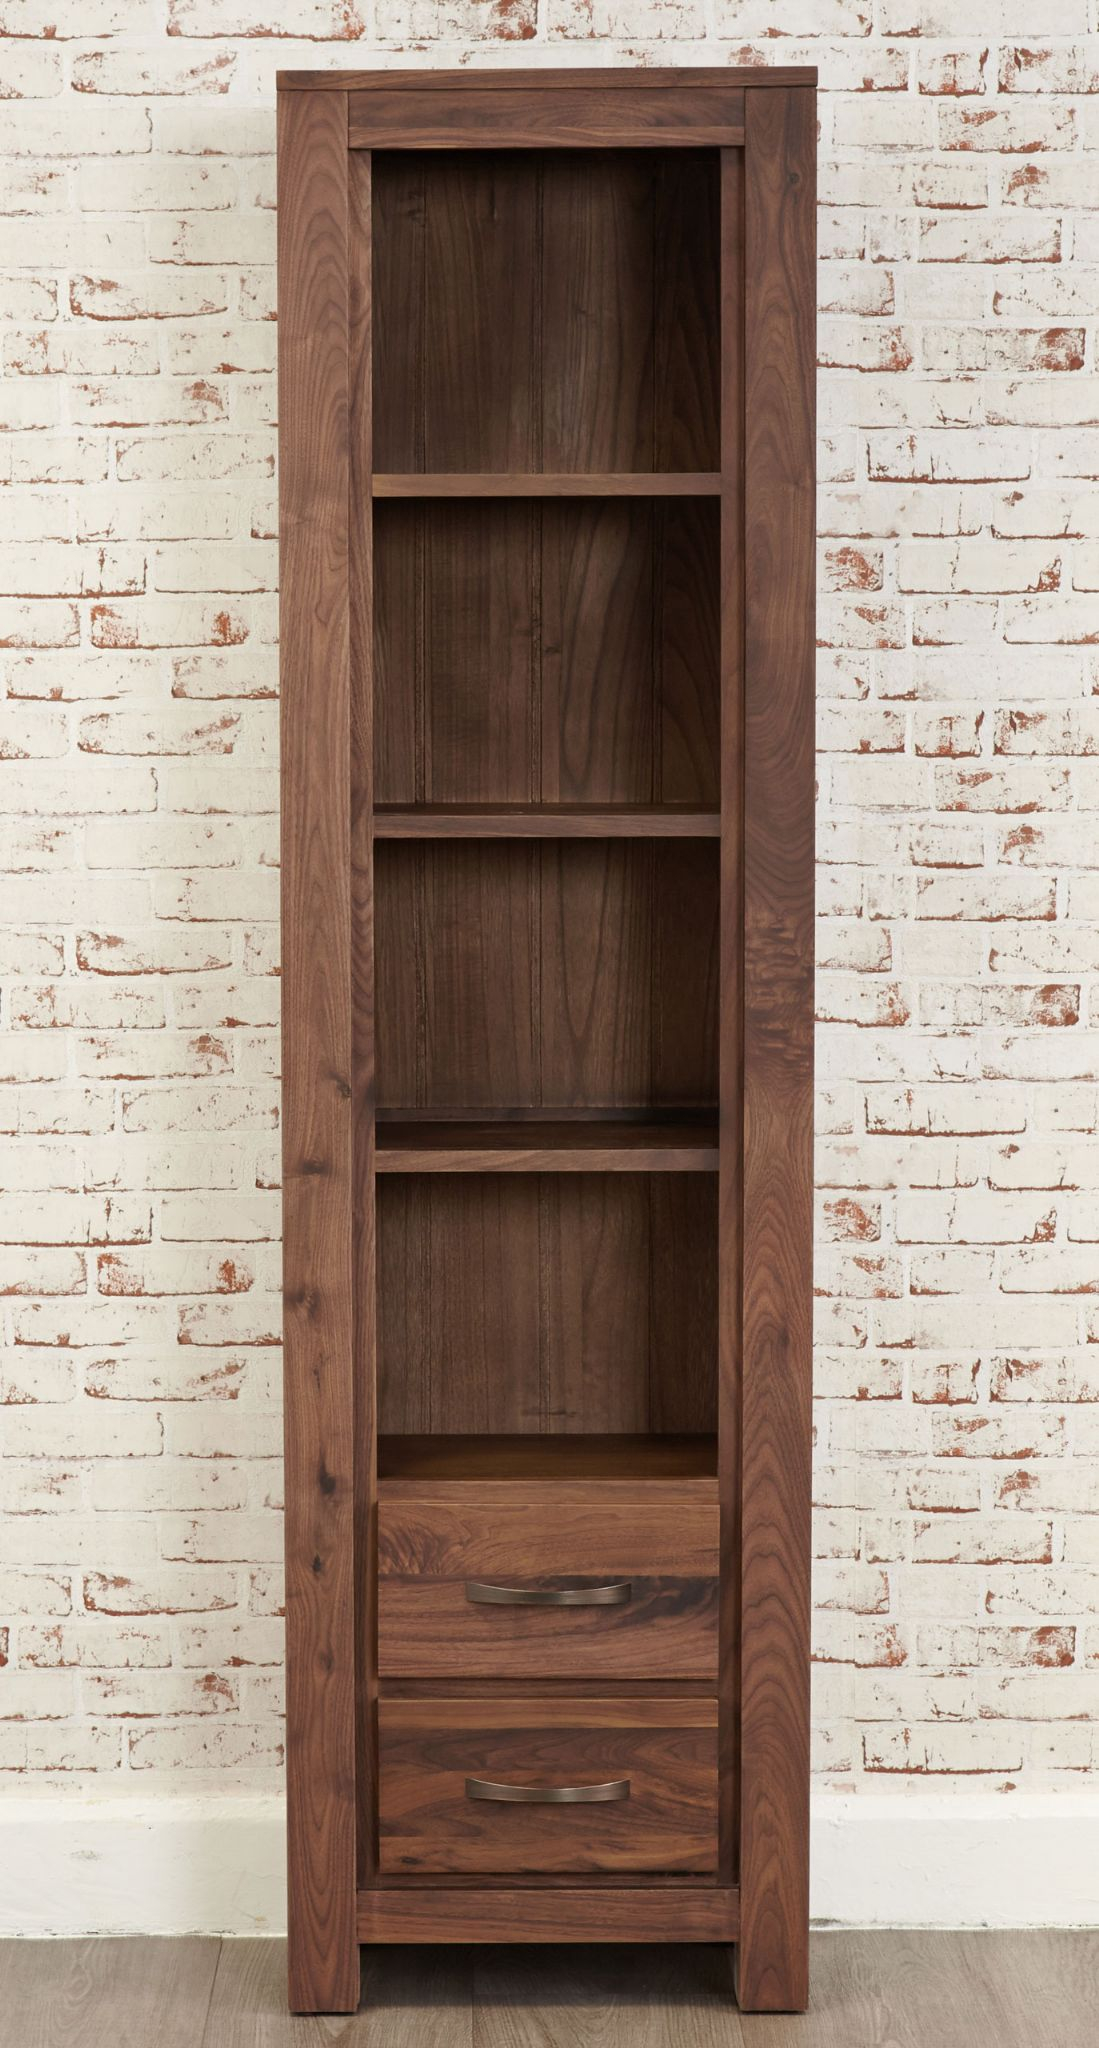 Mayan Walnut Tall Narrow Bookcase intended for sizing 1099 X 2048